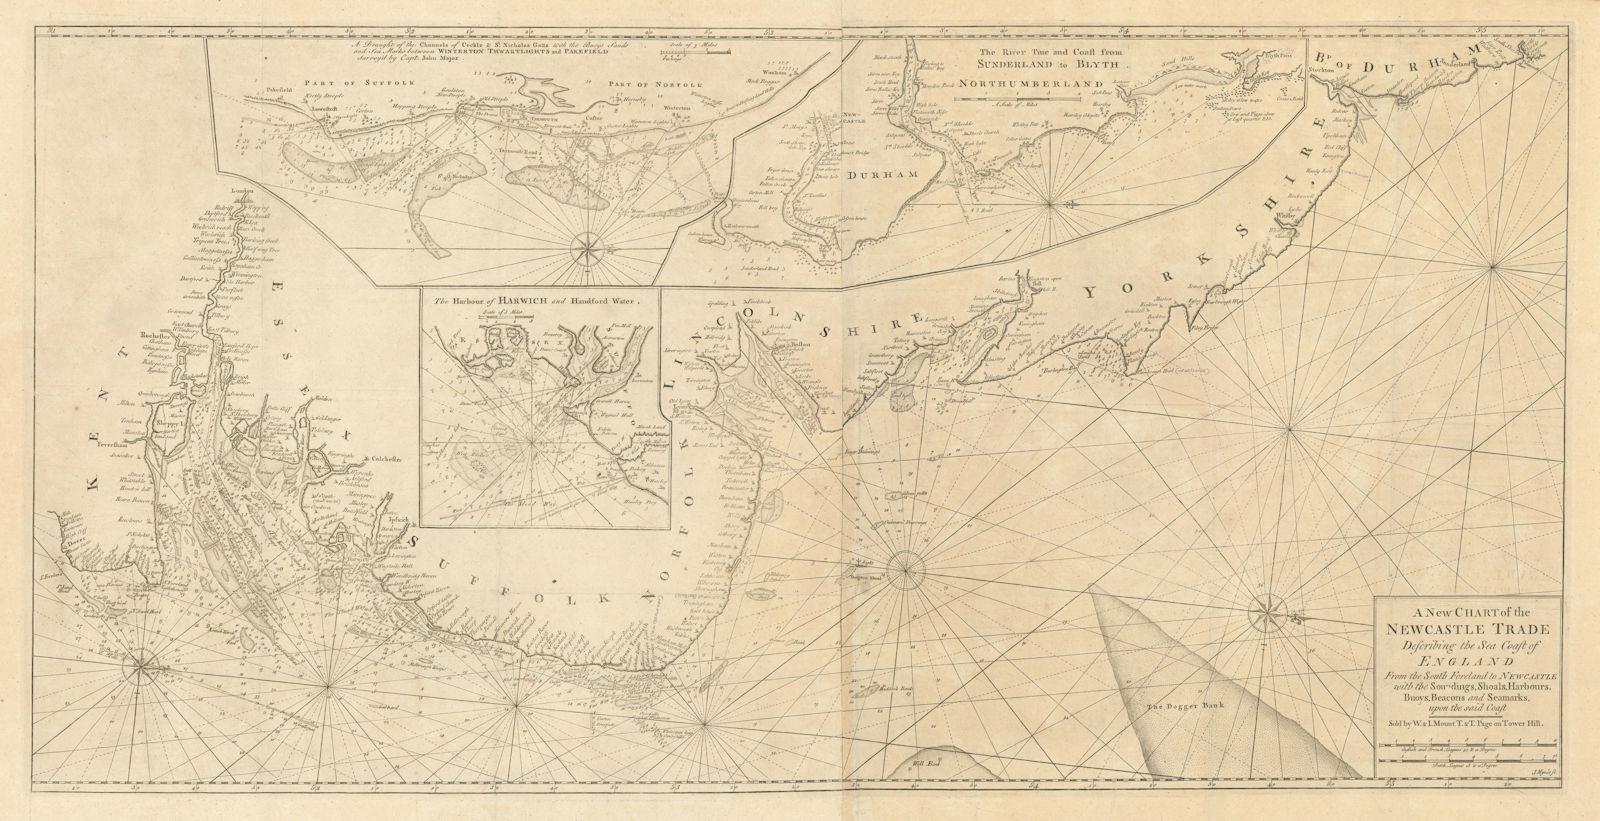 Chart of the Newcastle Trade describing… coast of England. MOUNT & PAGE 1758 map